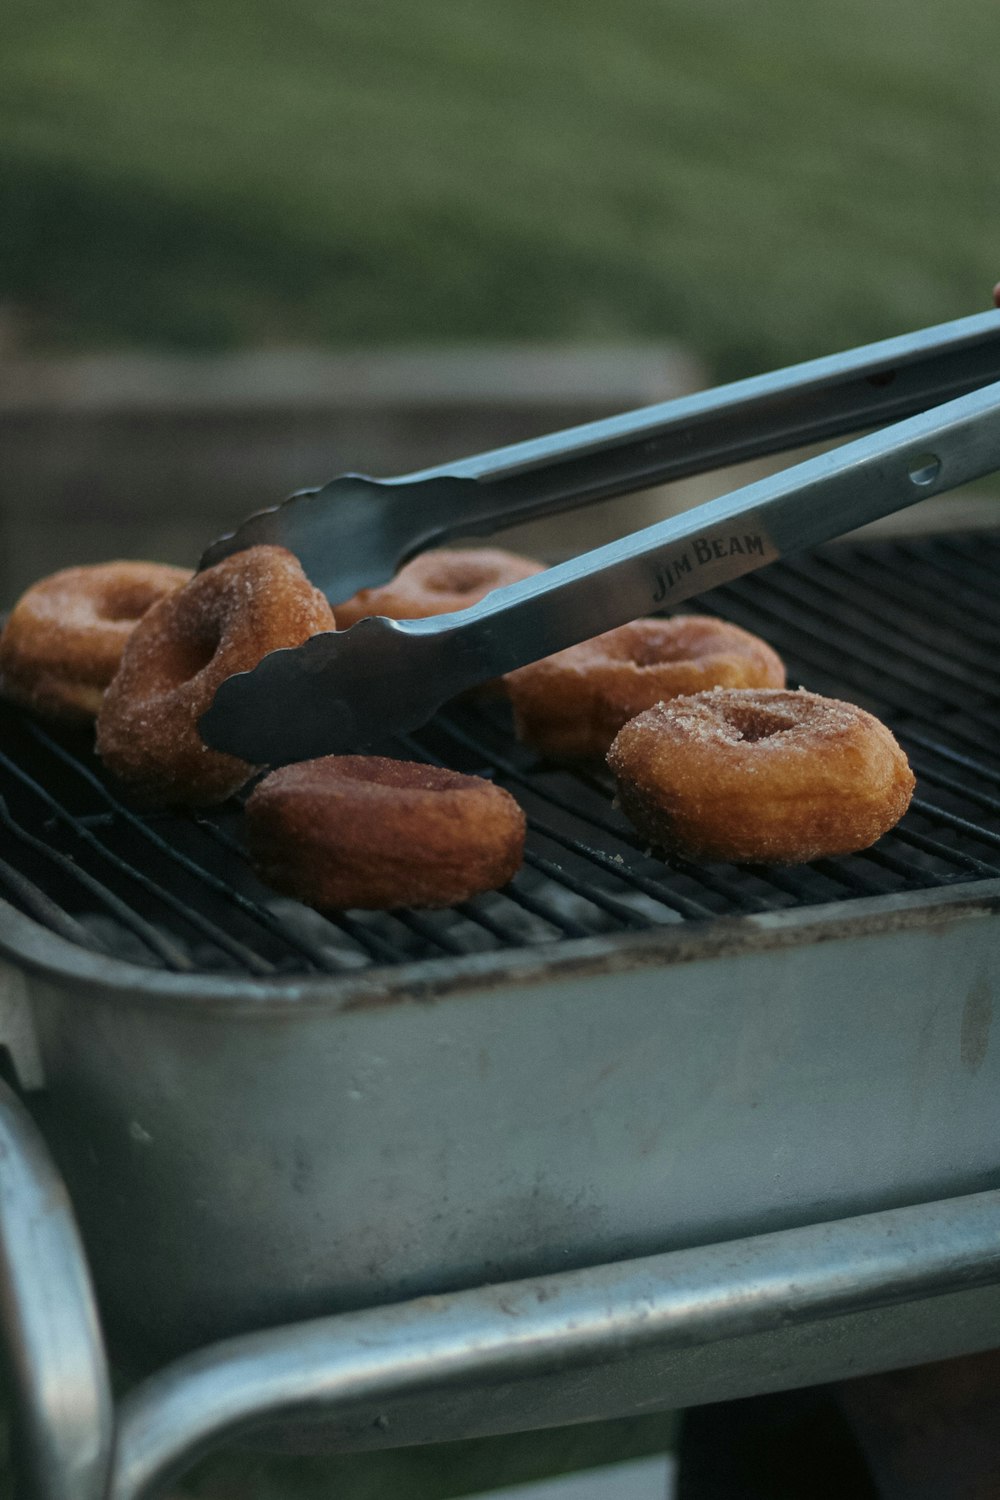 a person is putting donuts in a grill